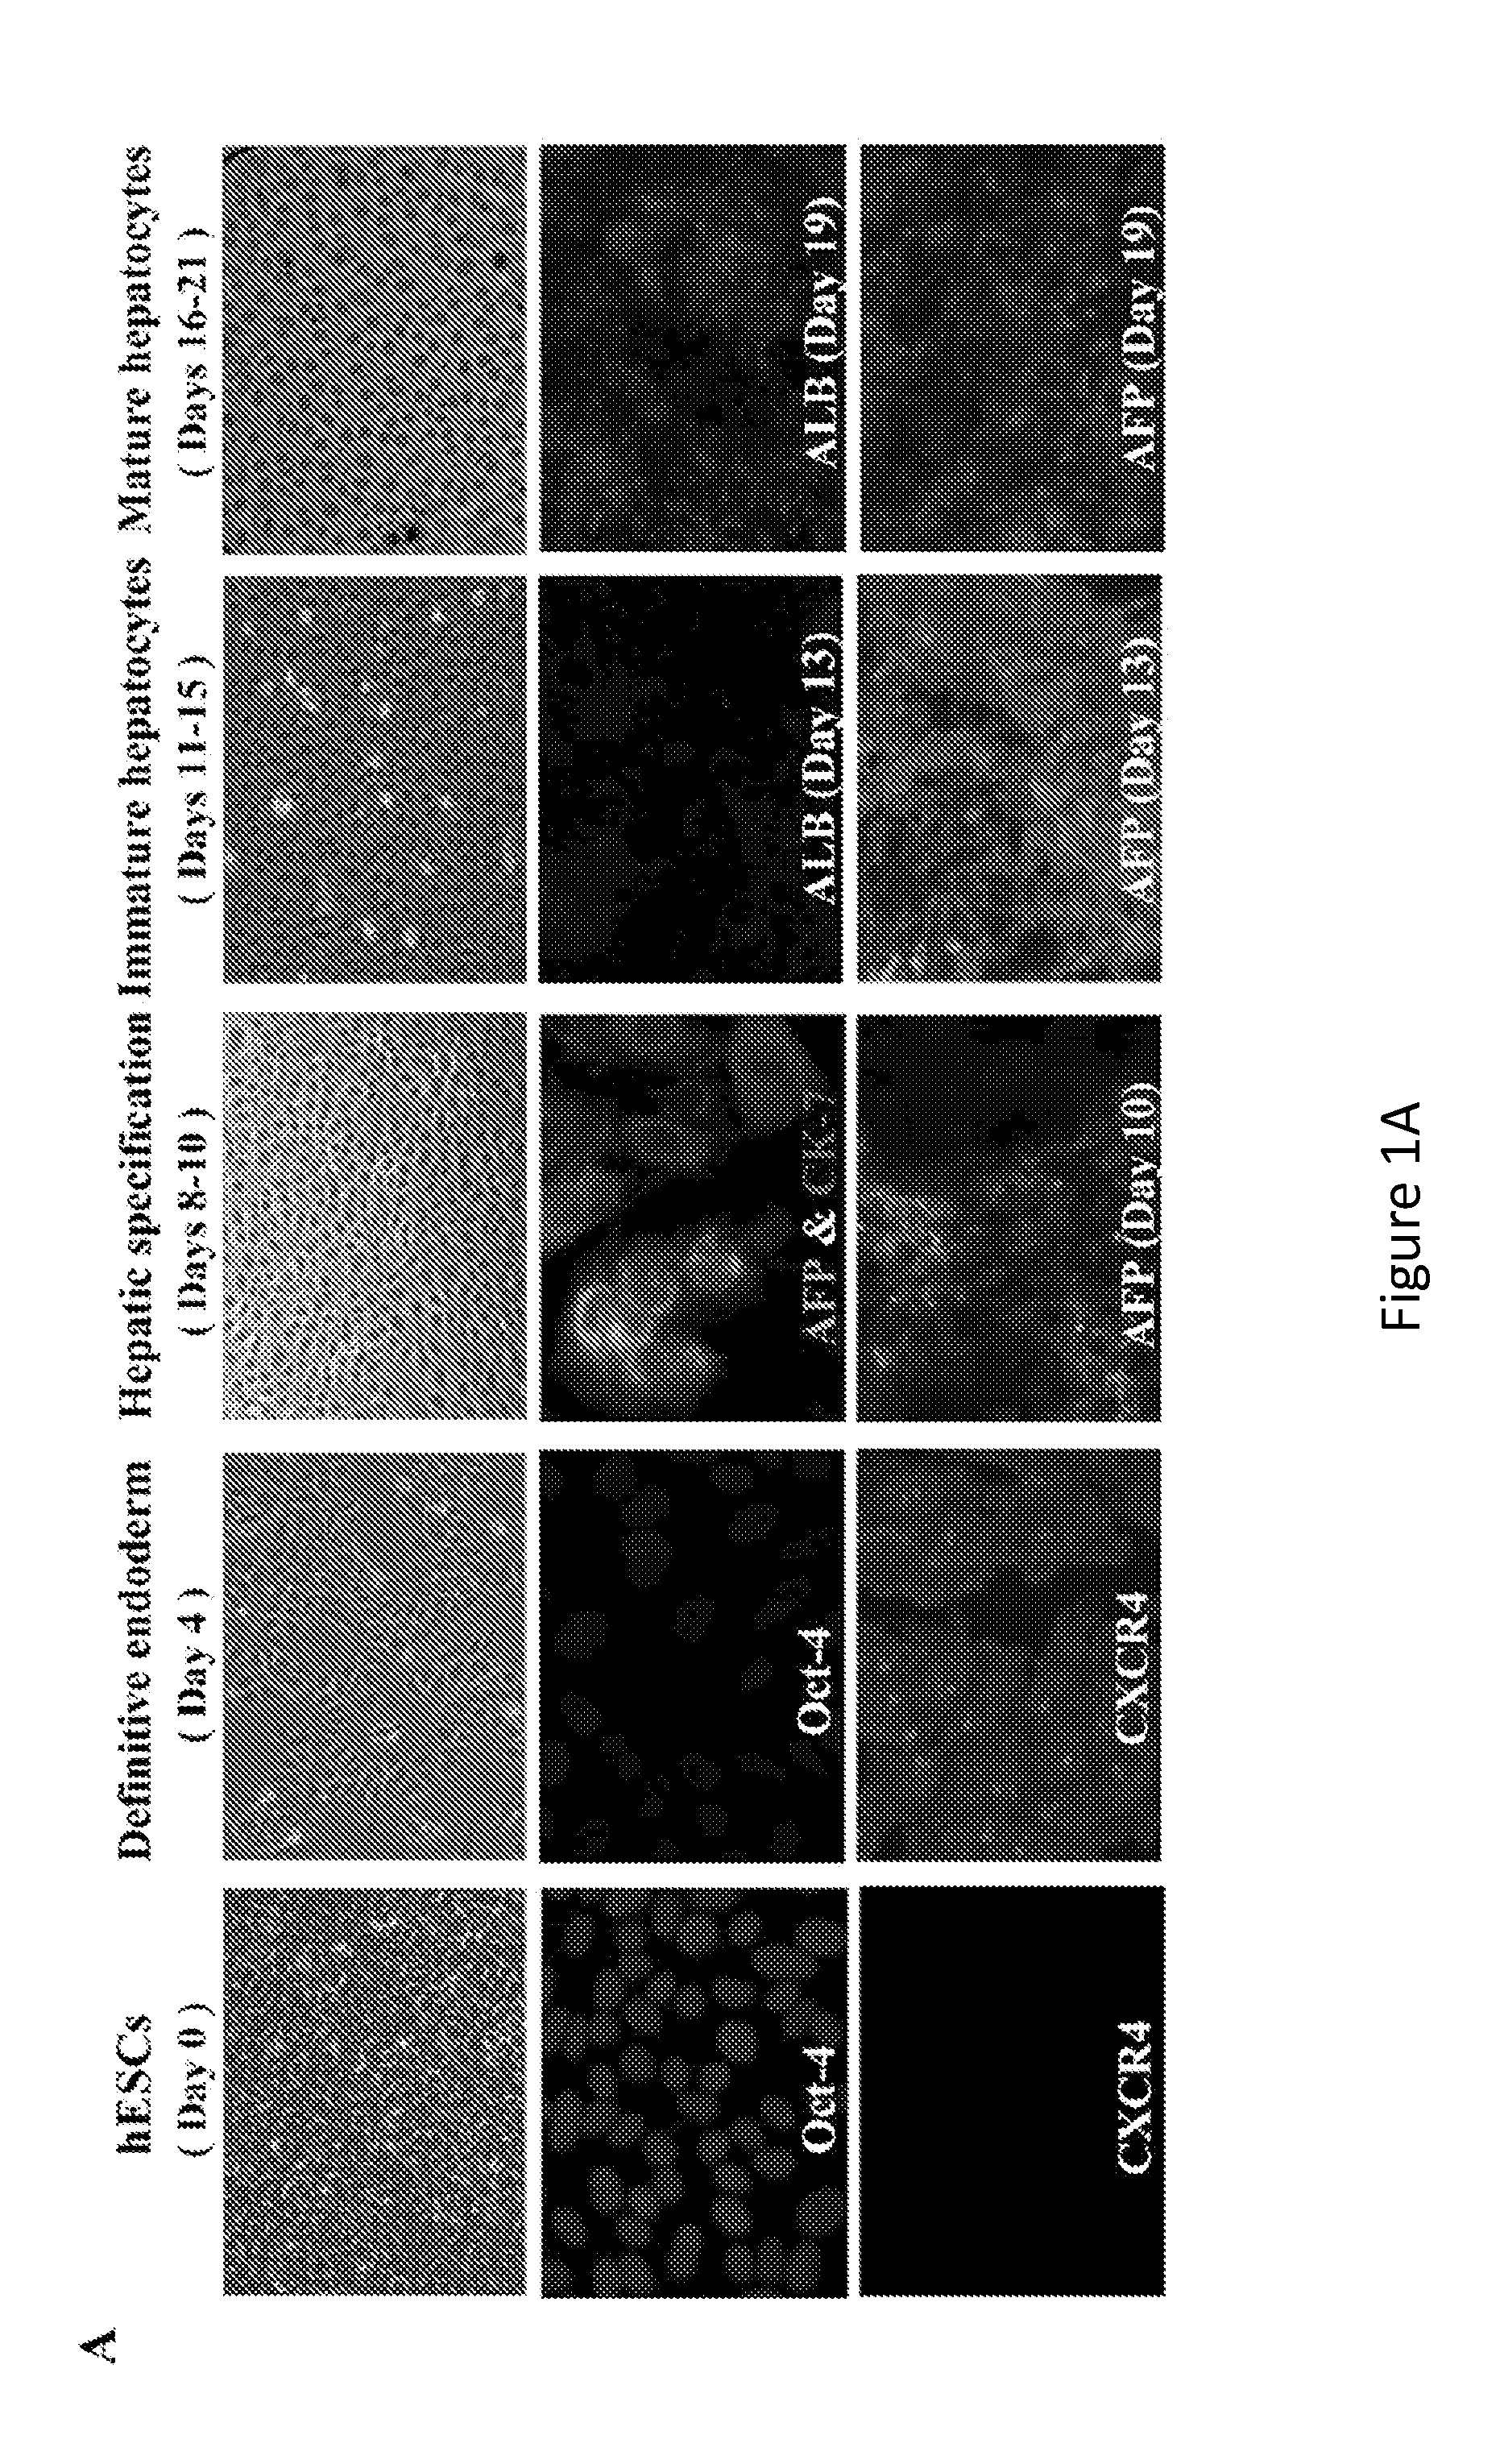 Hepatitis Virus Culture Systems Using Stem Cell-Derived Human Hepatocyte-Like Cells and Their Methods of Use